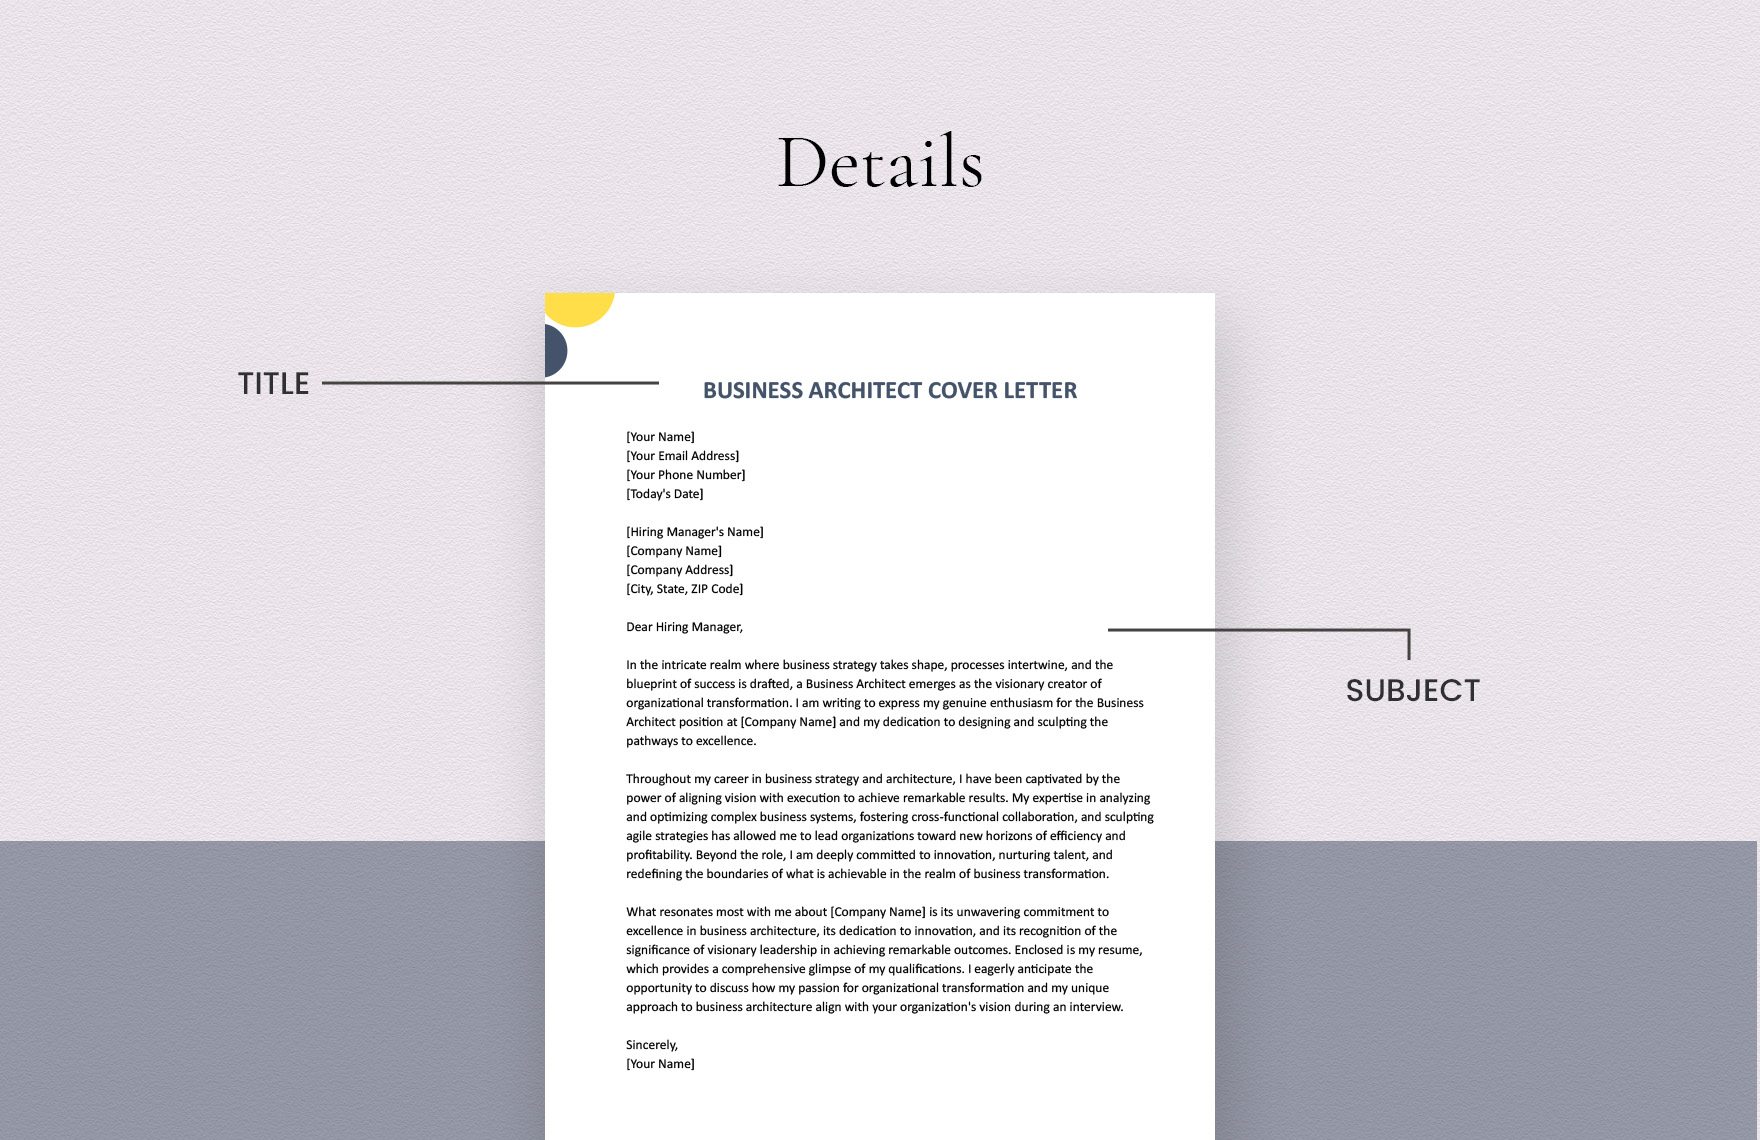 Business Architect Cover Letter